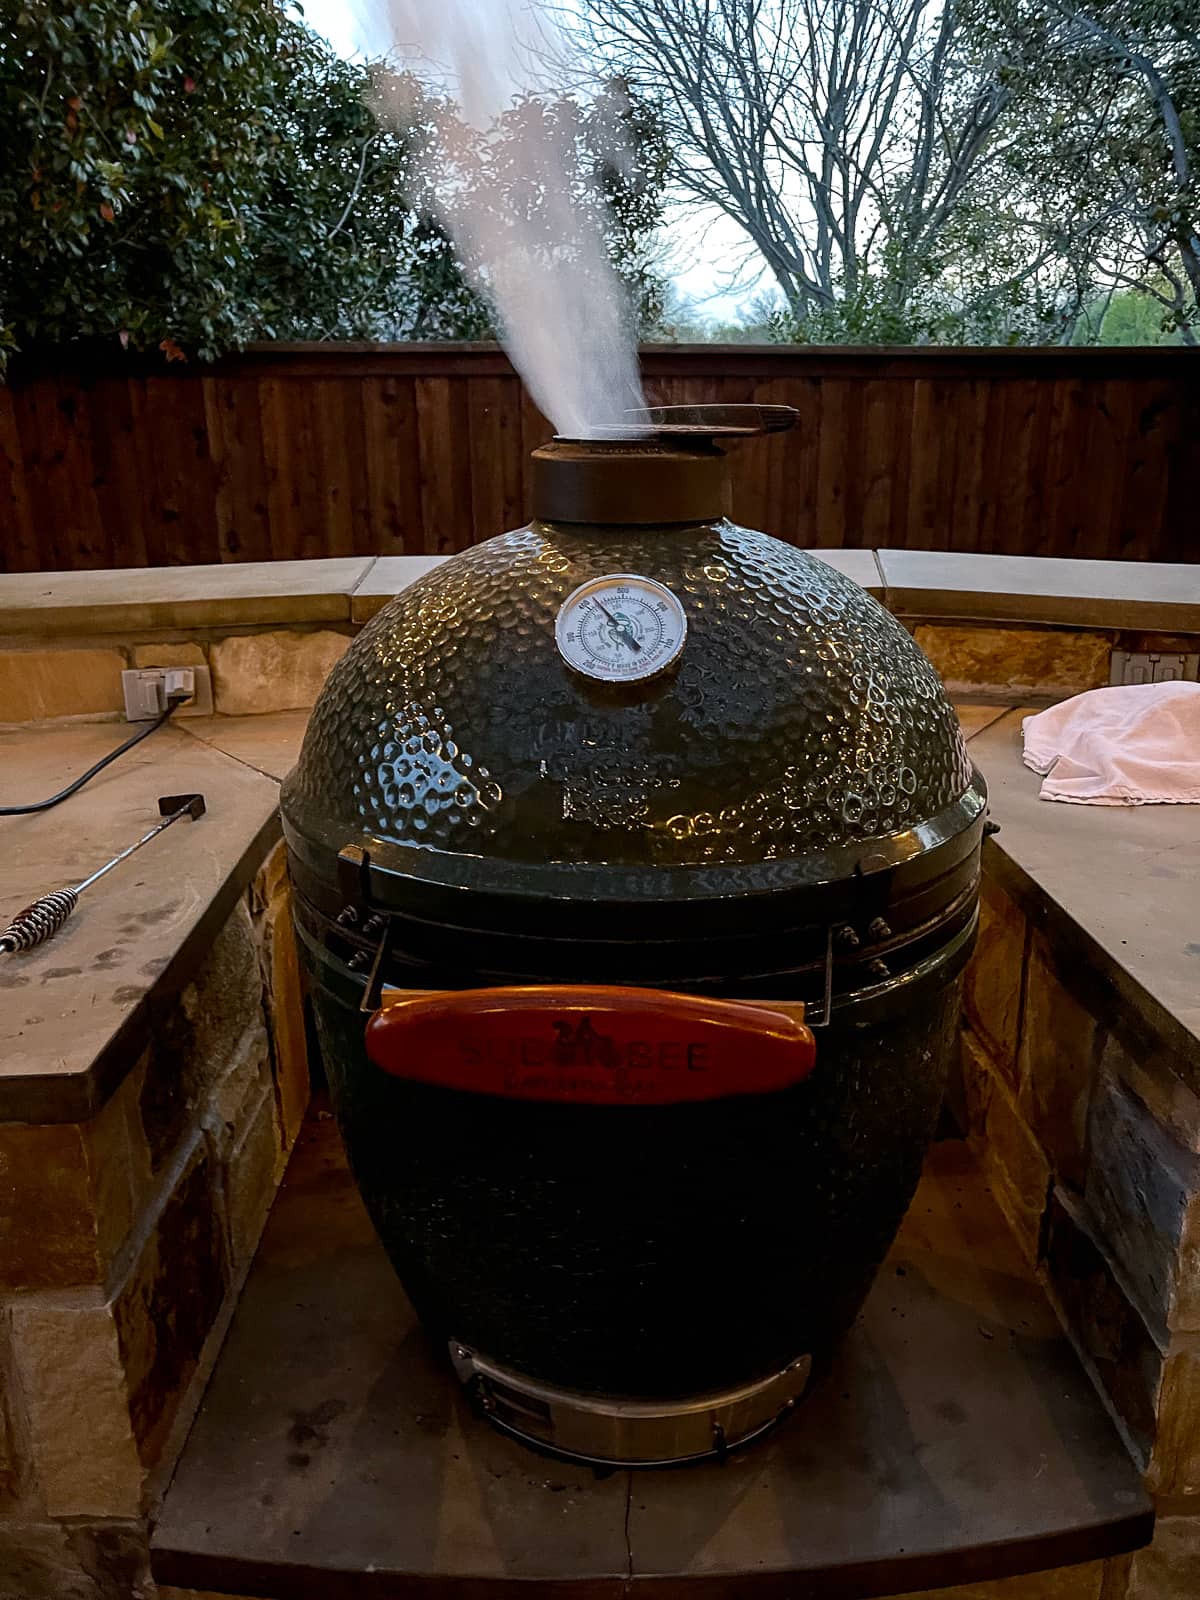 A Big Green Egg smoking out of the top.